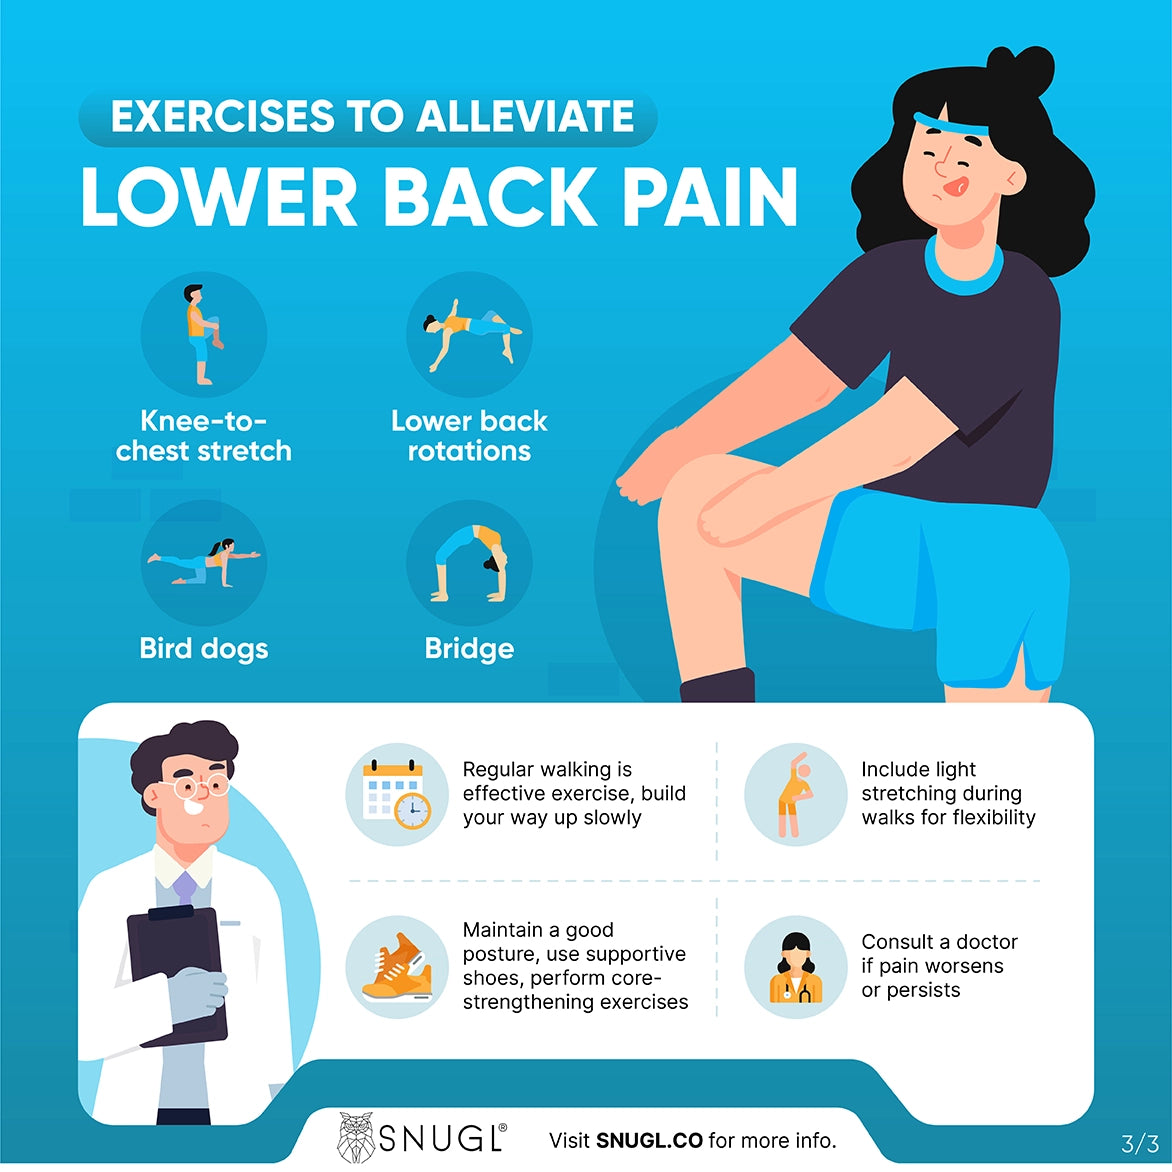 How To Get Rid Of Lower Back Pain While Walking - SNUGL.co